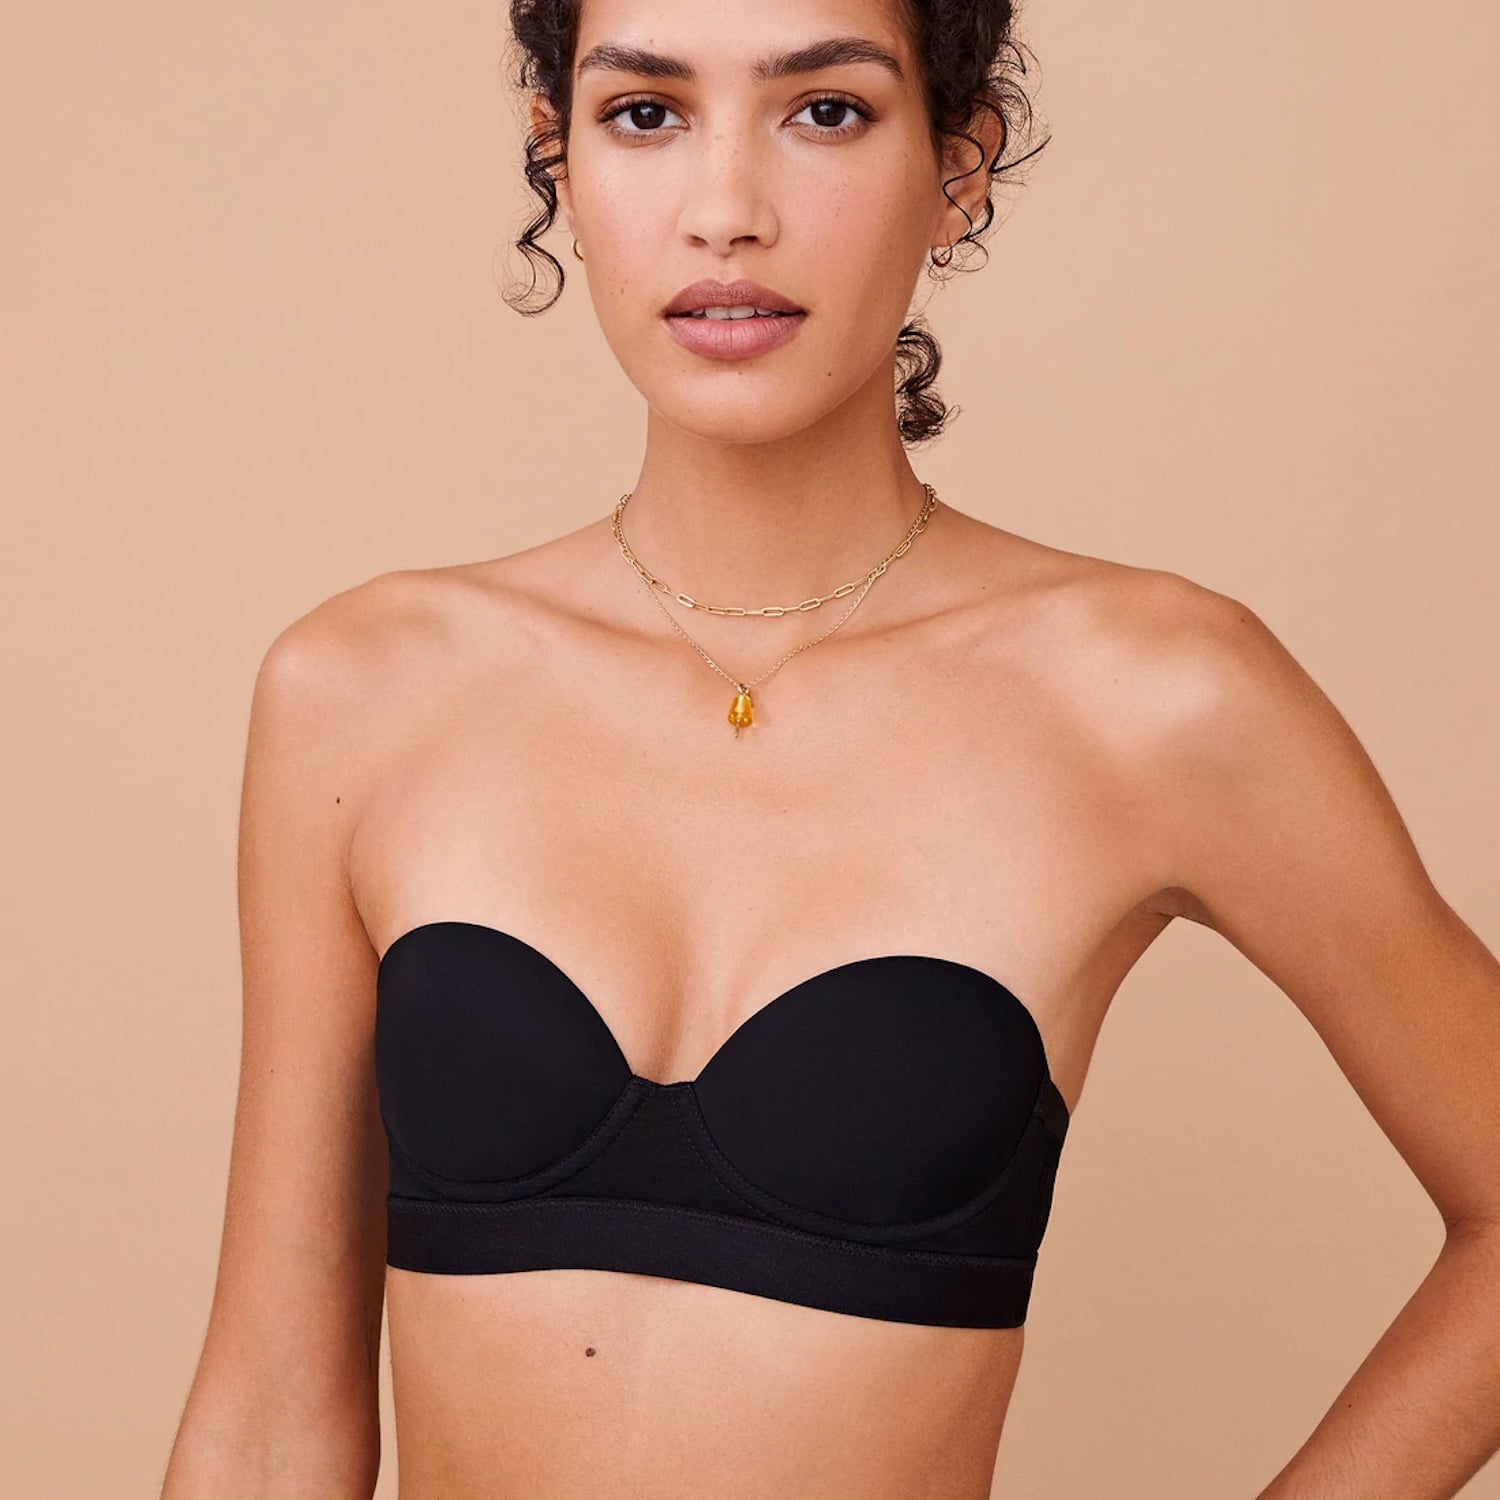 In Search of a Strapless Bra: One Vogue Editor Investigates